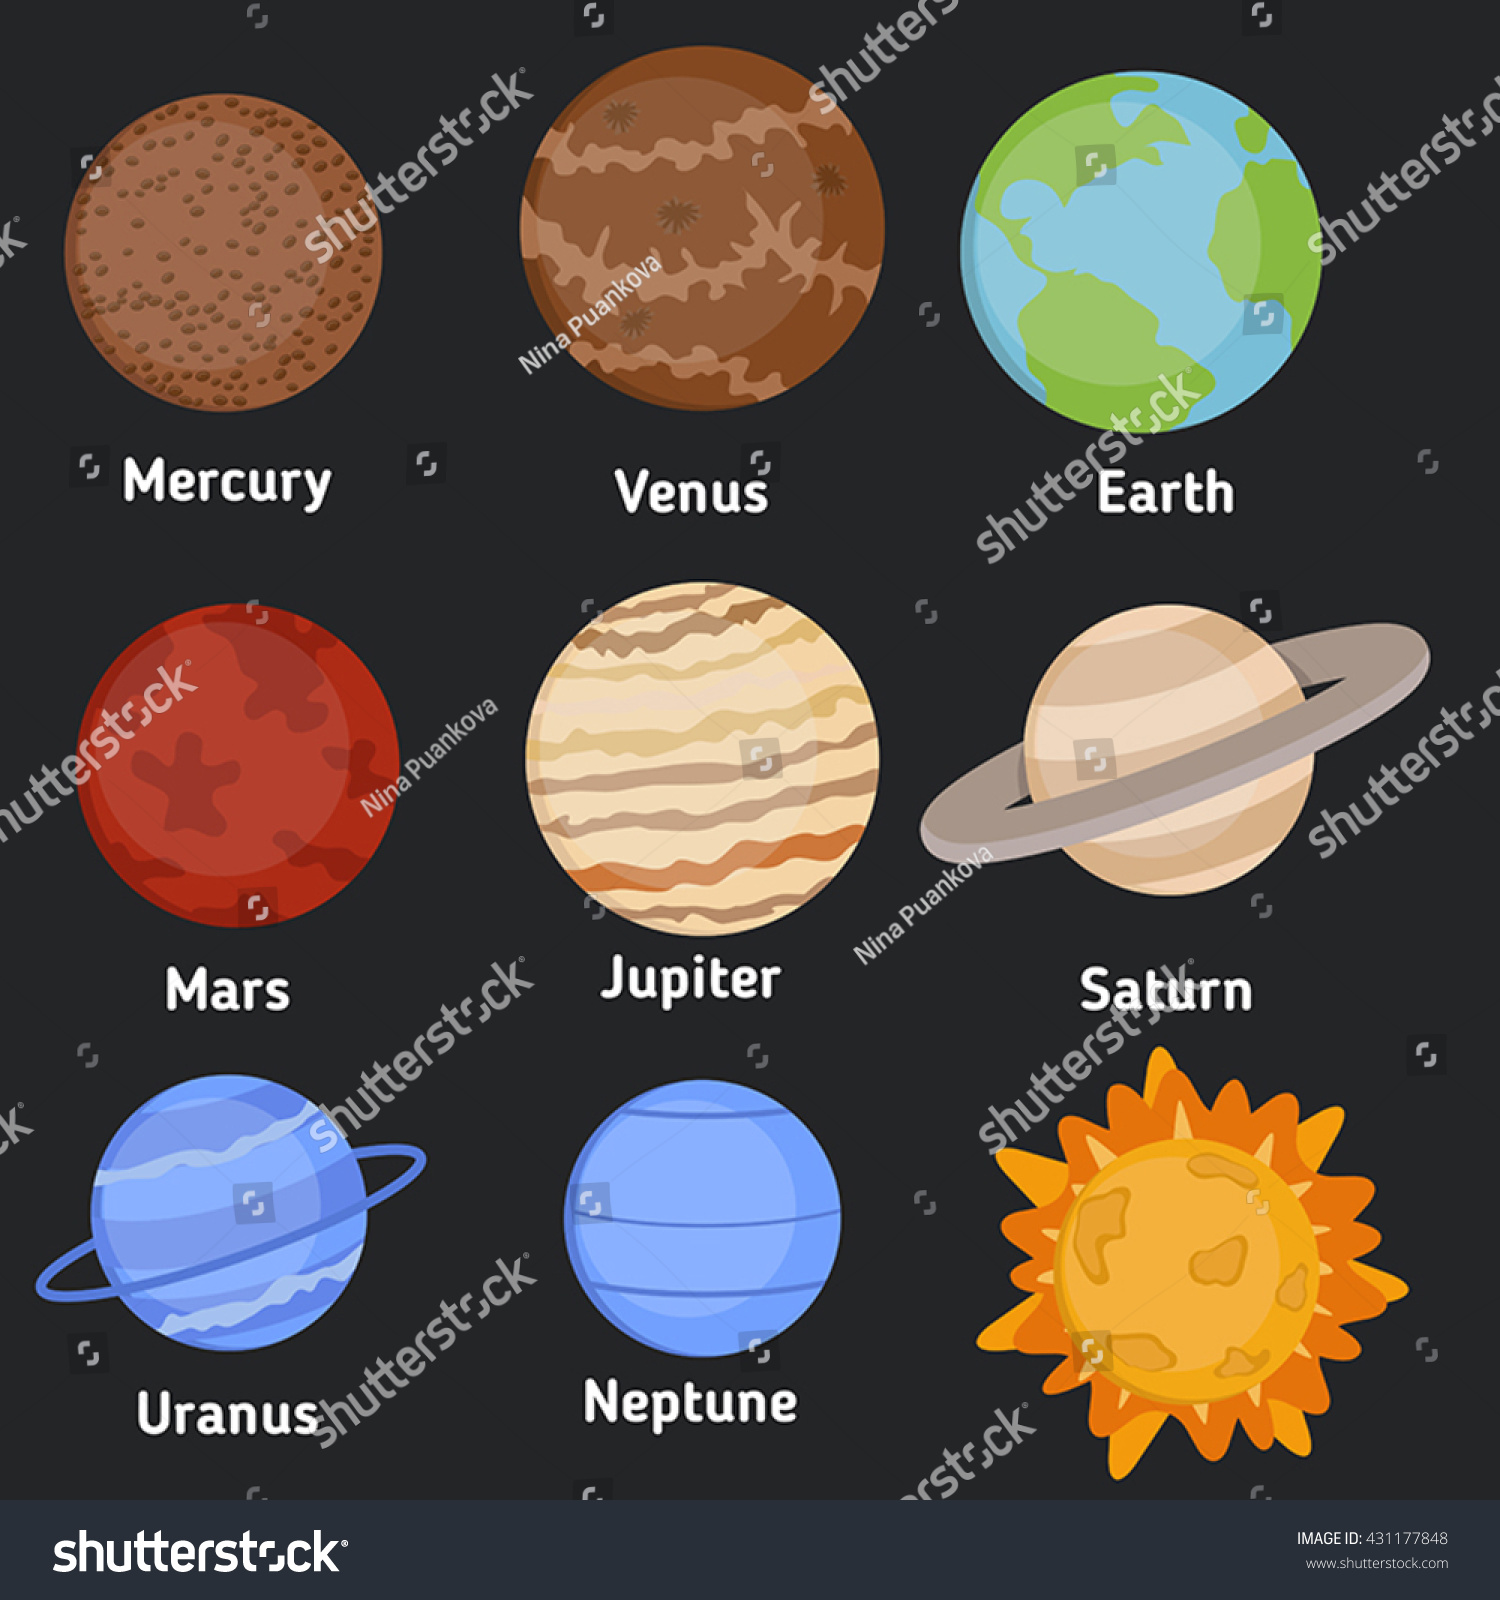 Vector Illustration Of Planets Our Solar System. - 431177848 : Shutterstock